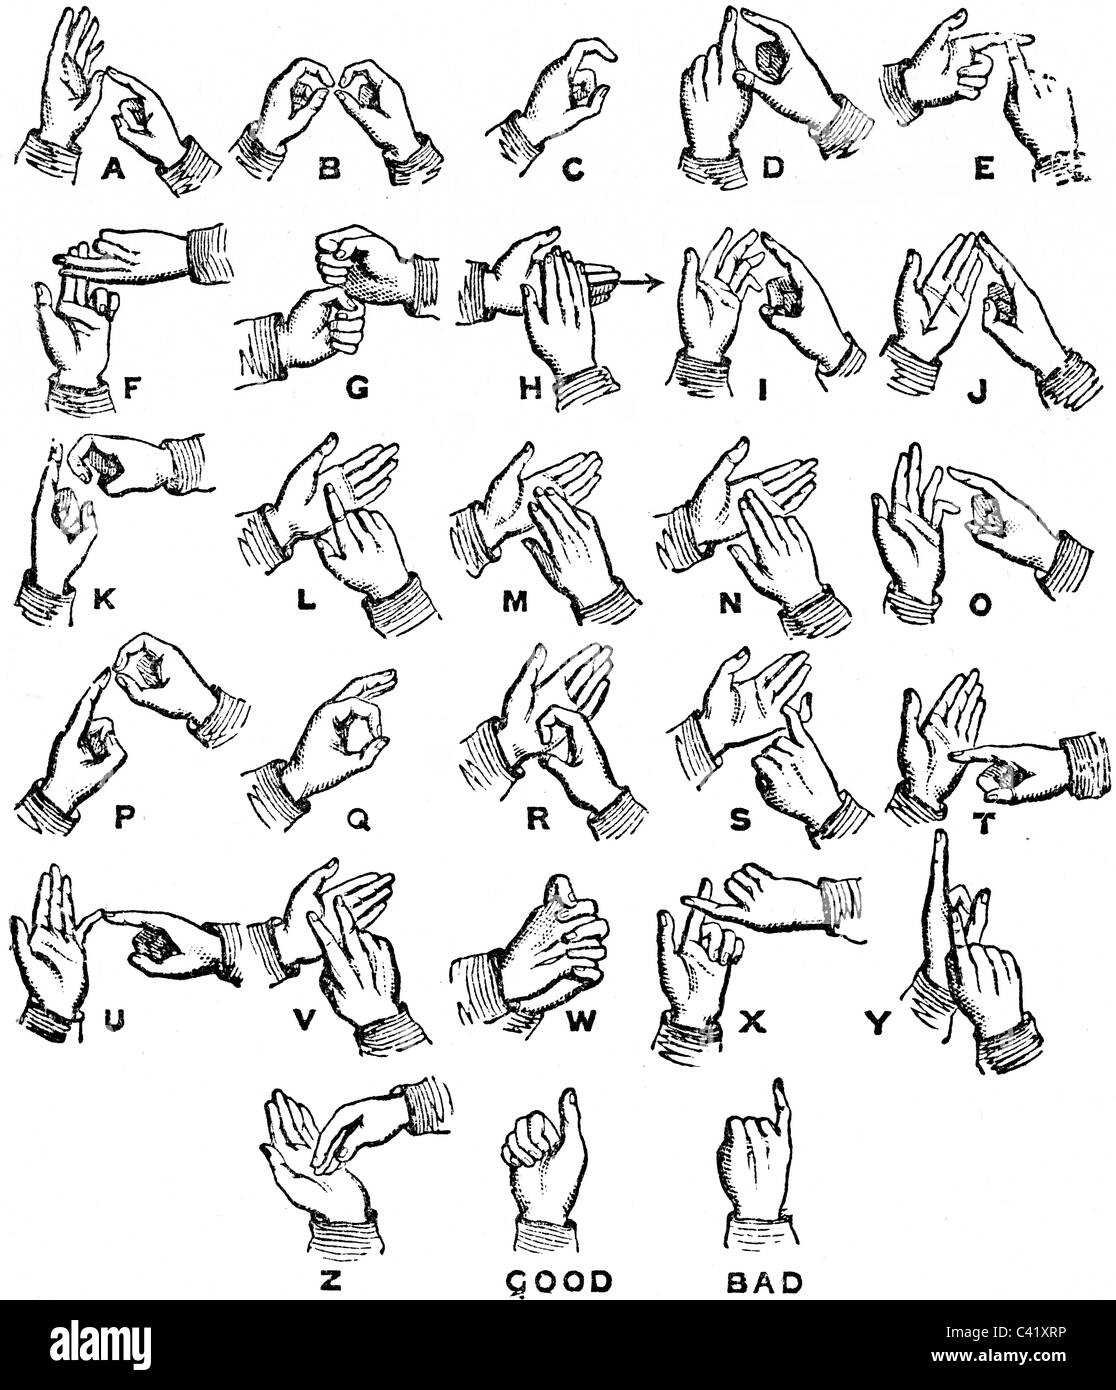 19th Century book illustration, taken from 9th edition (1875) of Encyclopaedia Britannica, of Deaf Dumb Double - Handed Alphabet Stock Photo